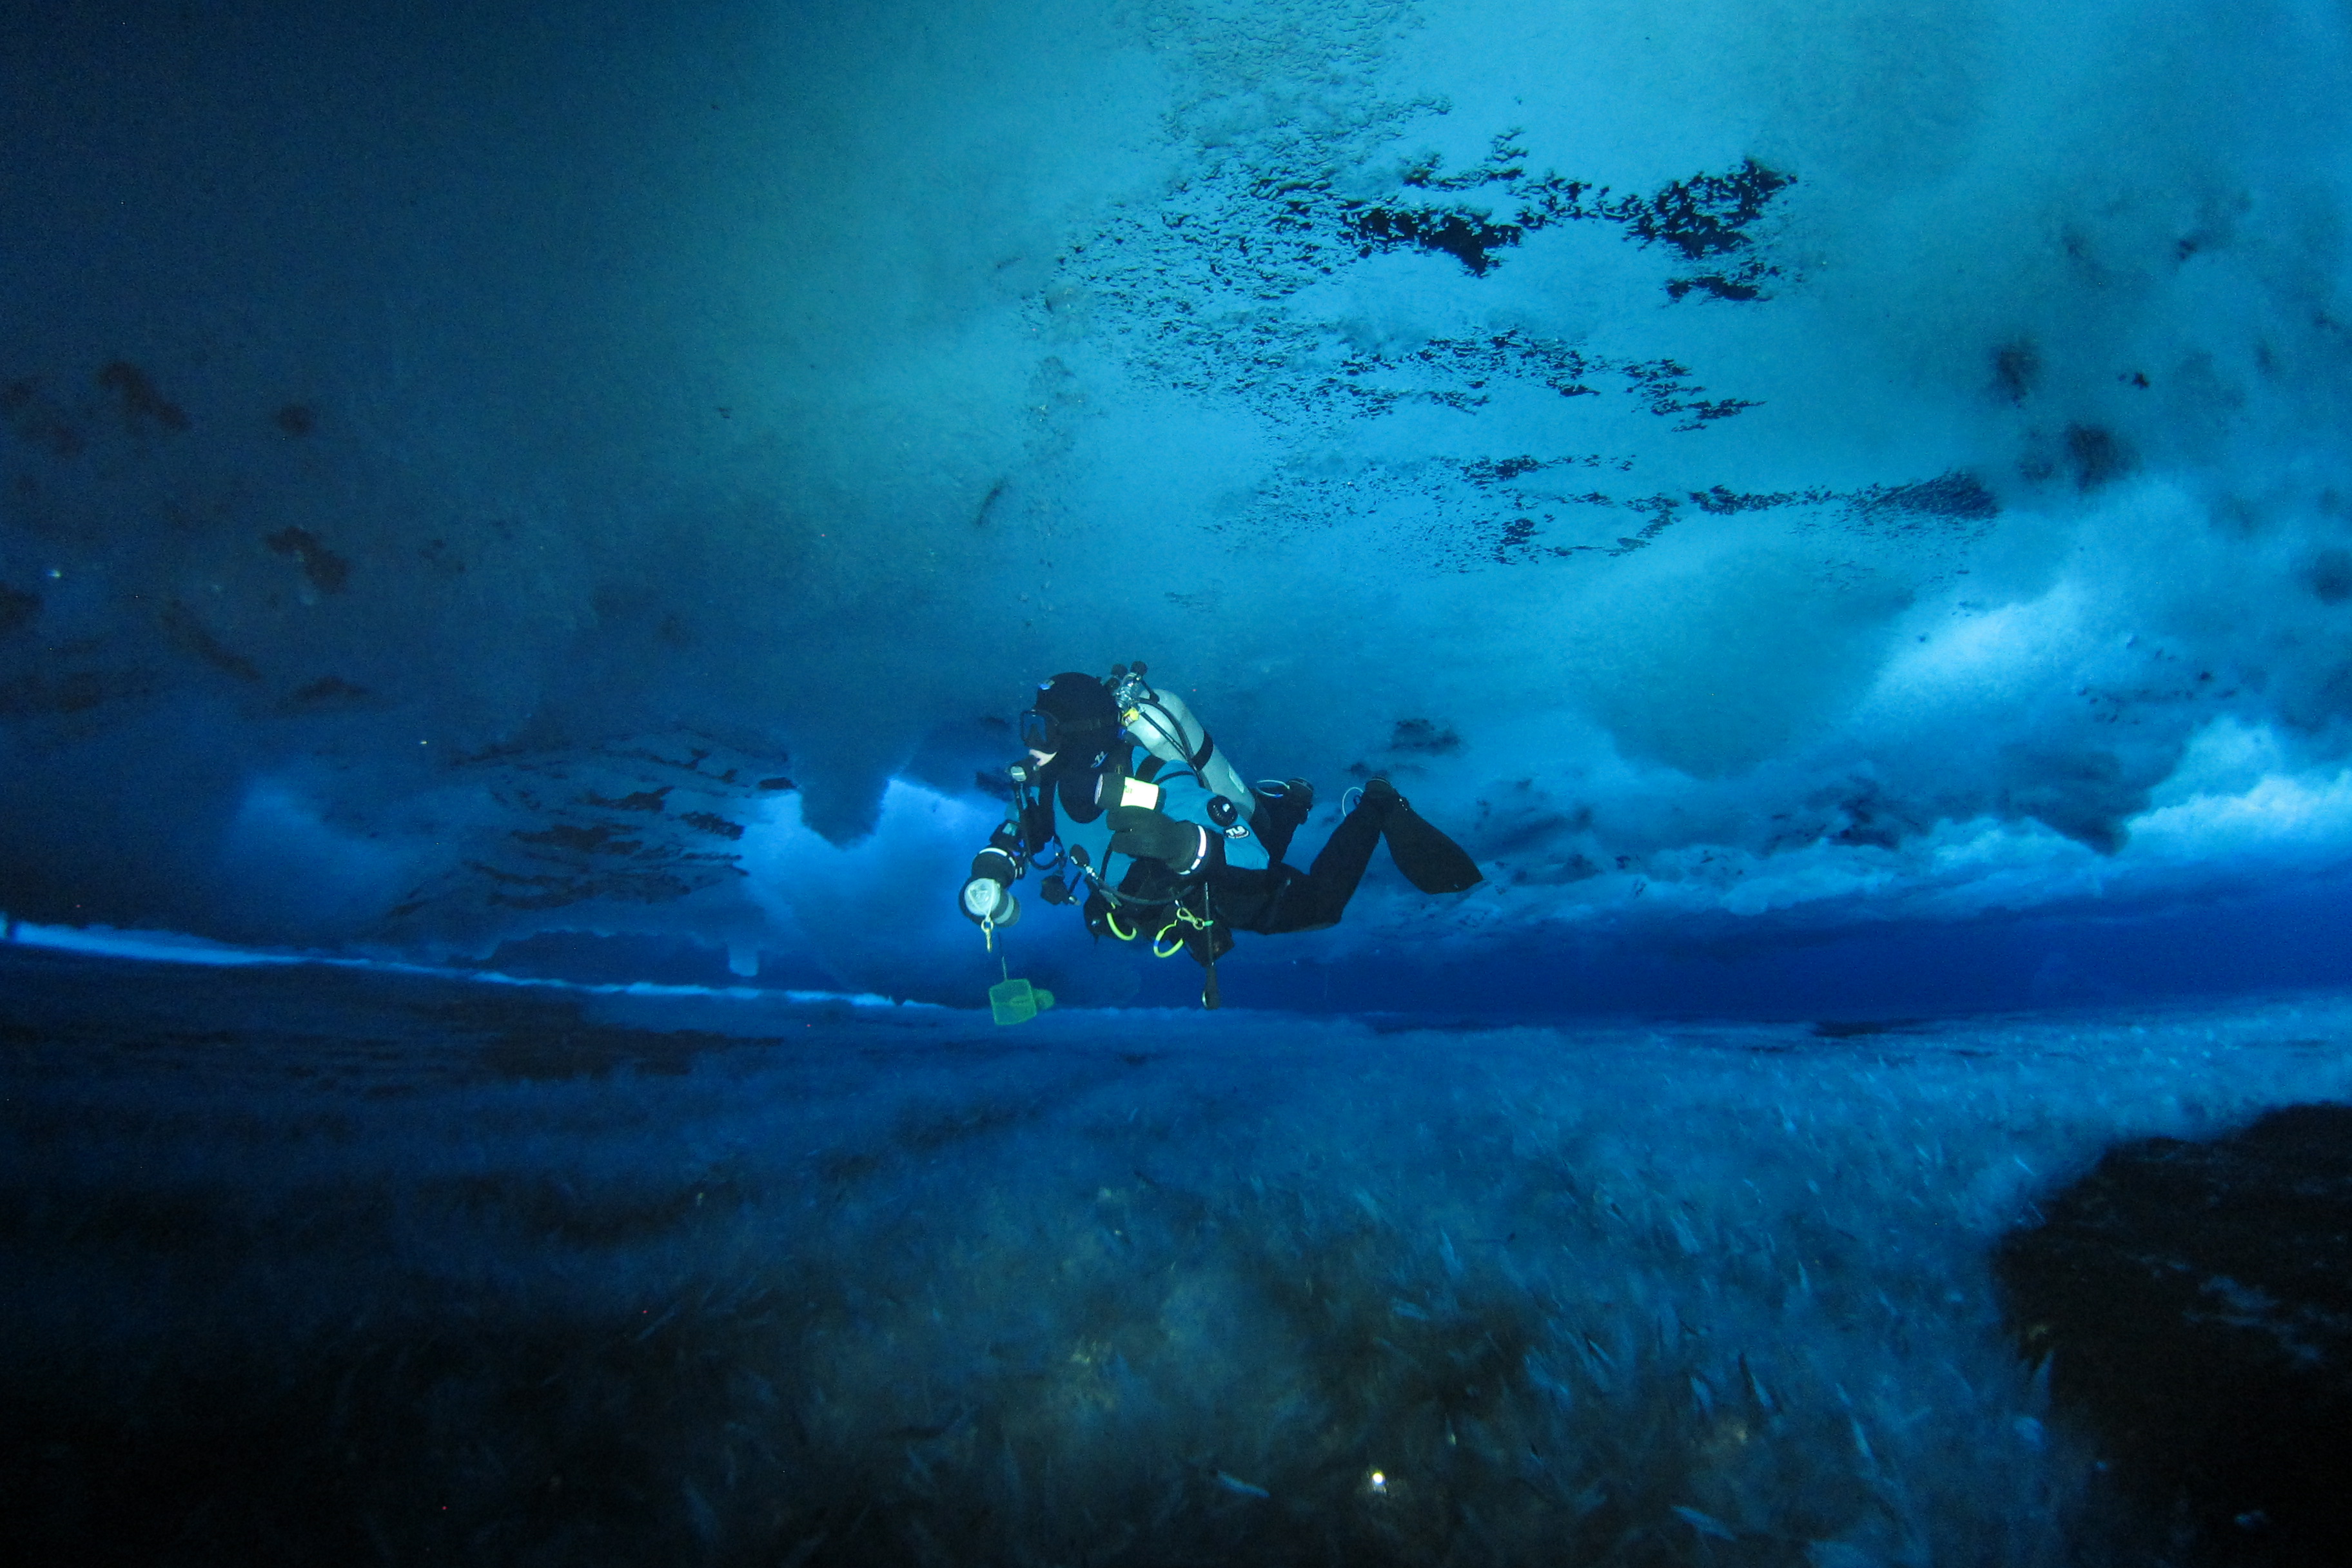 Amanda Frazier dives at Antartica Turtle Rock in 2019. Photo by Rob Robbins